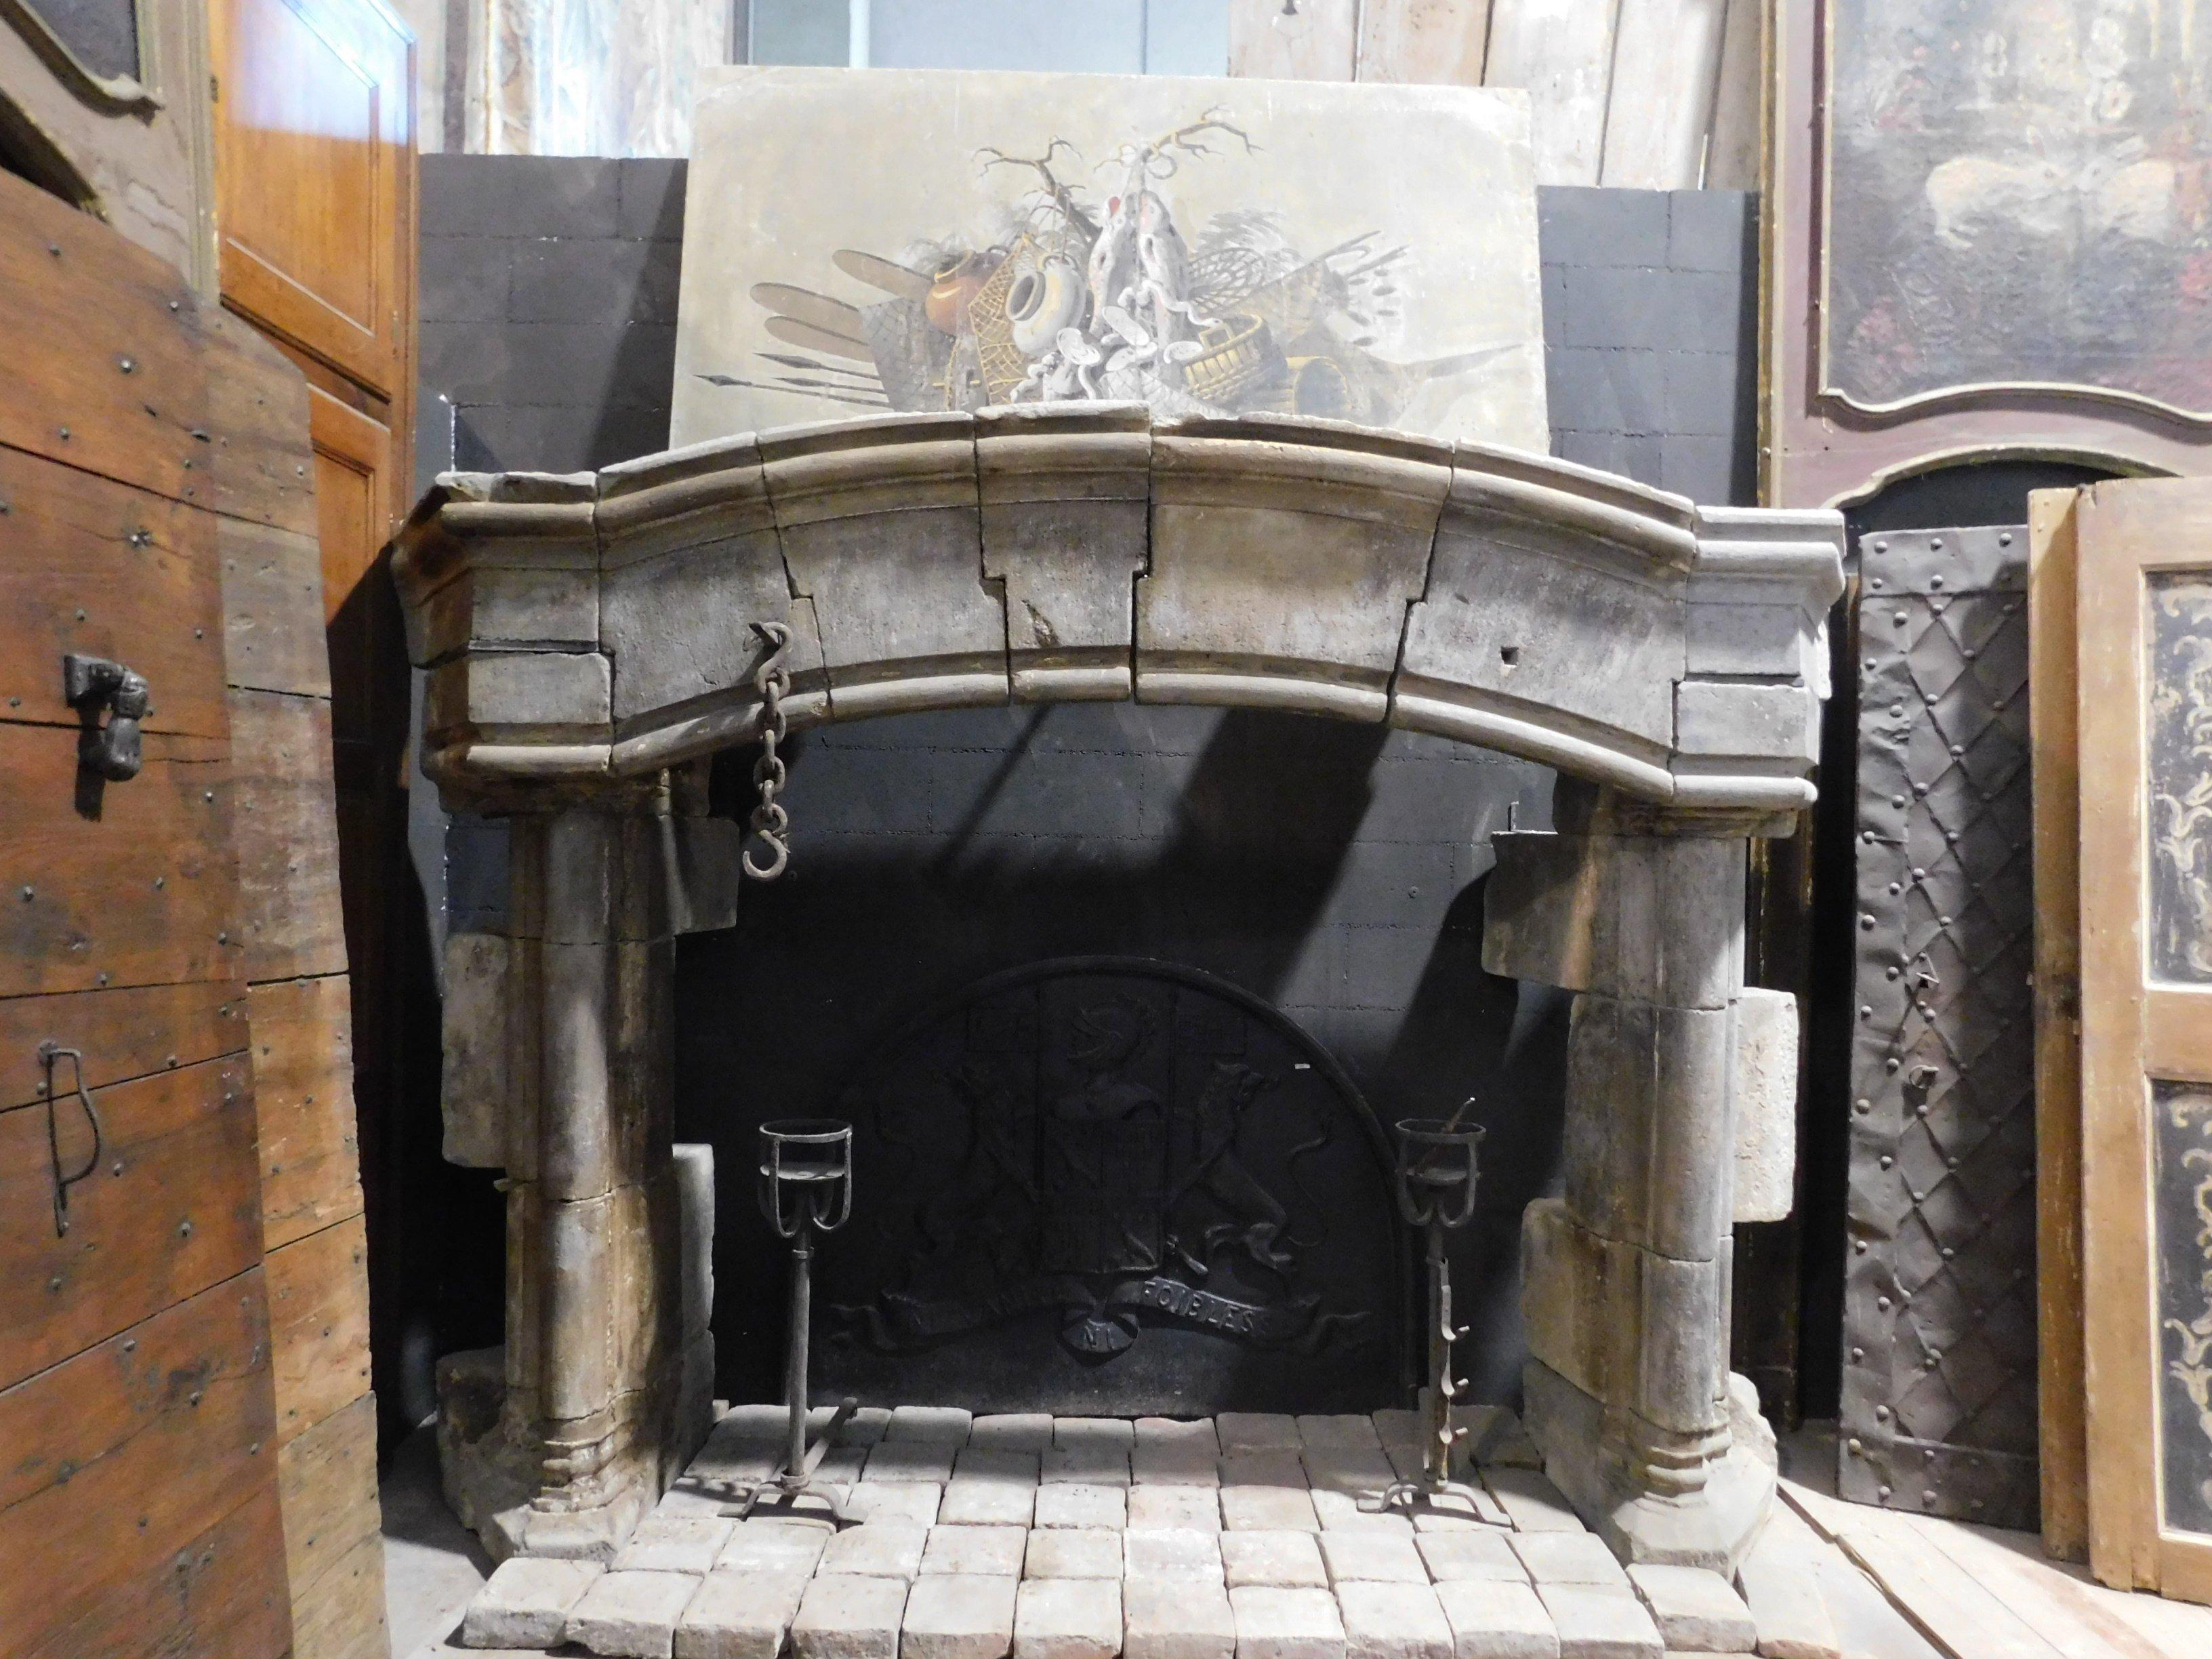 Ancient and very large fireplace, stone mantel (fireplace), imposing fireplace throughout the house, in full original Gothic style, built in the 1300s, for a castle in France.
Perfect for setting up films, sets or public or private interiors with a